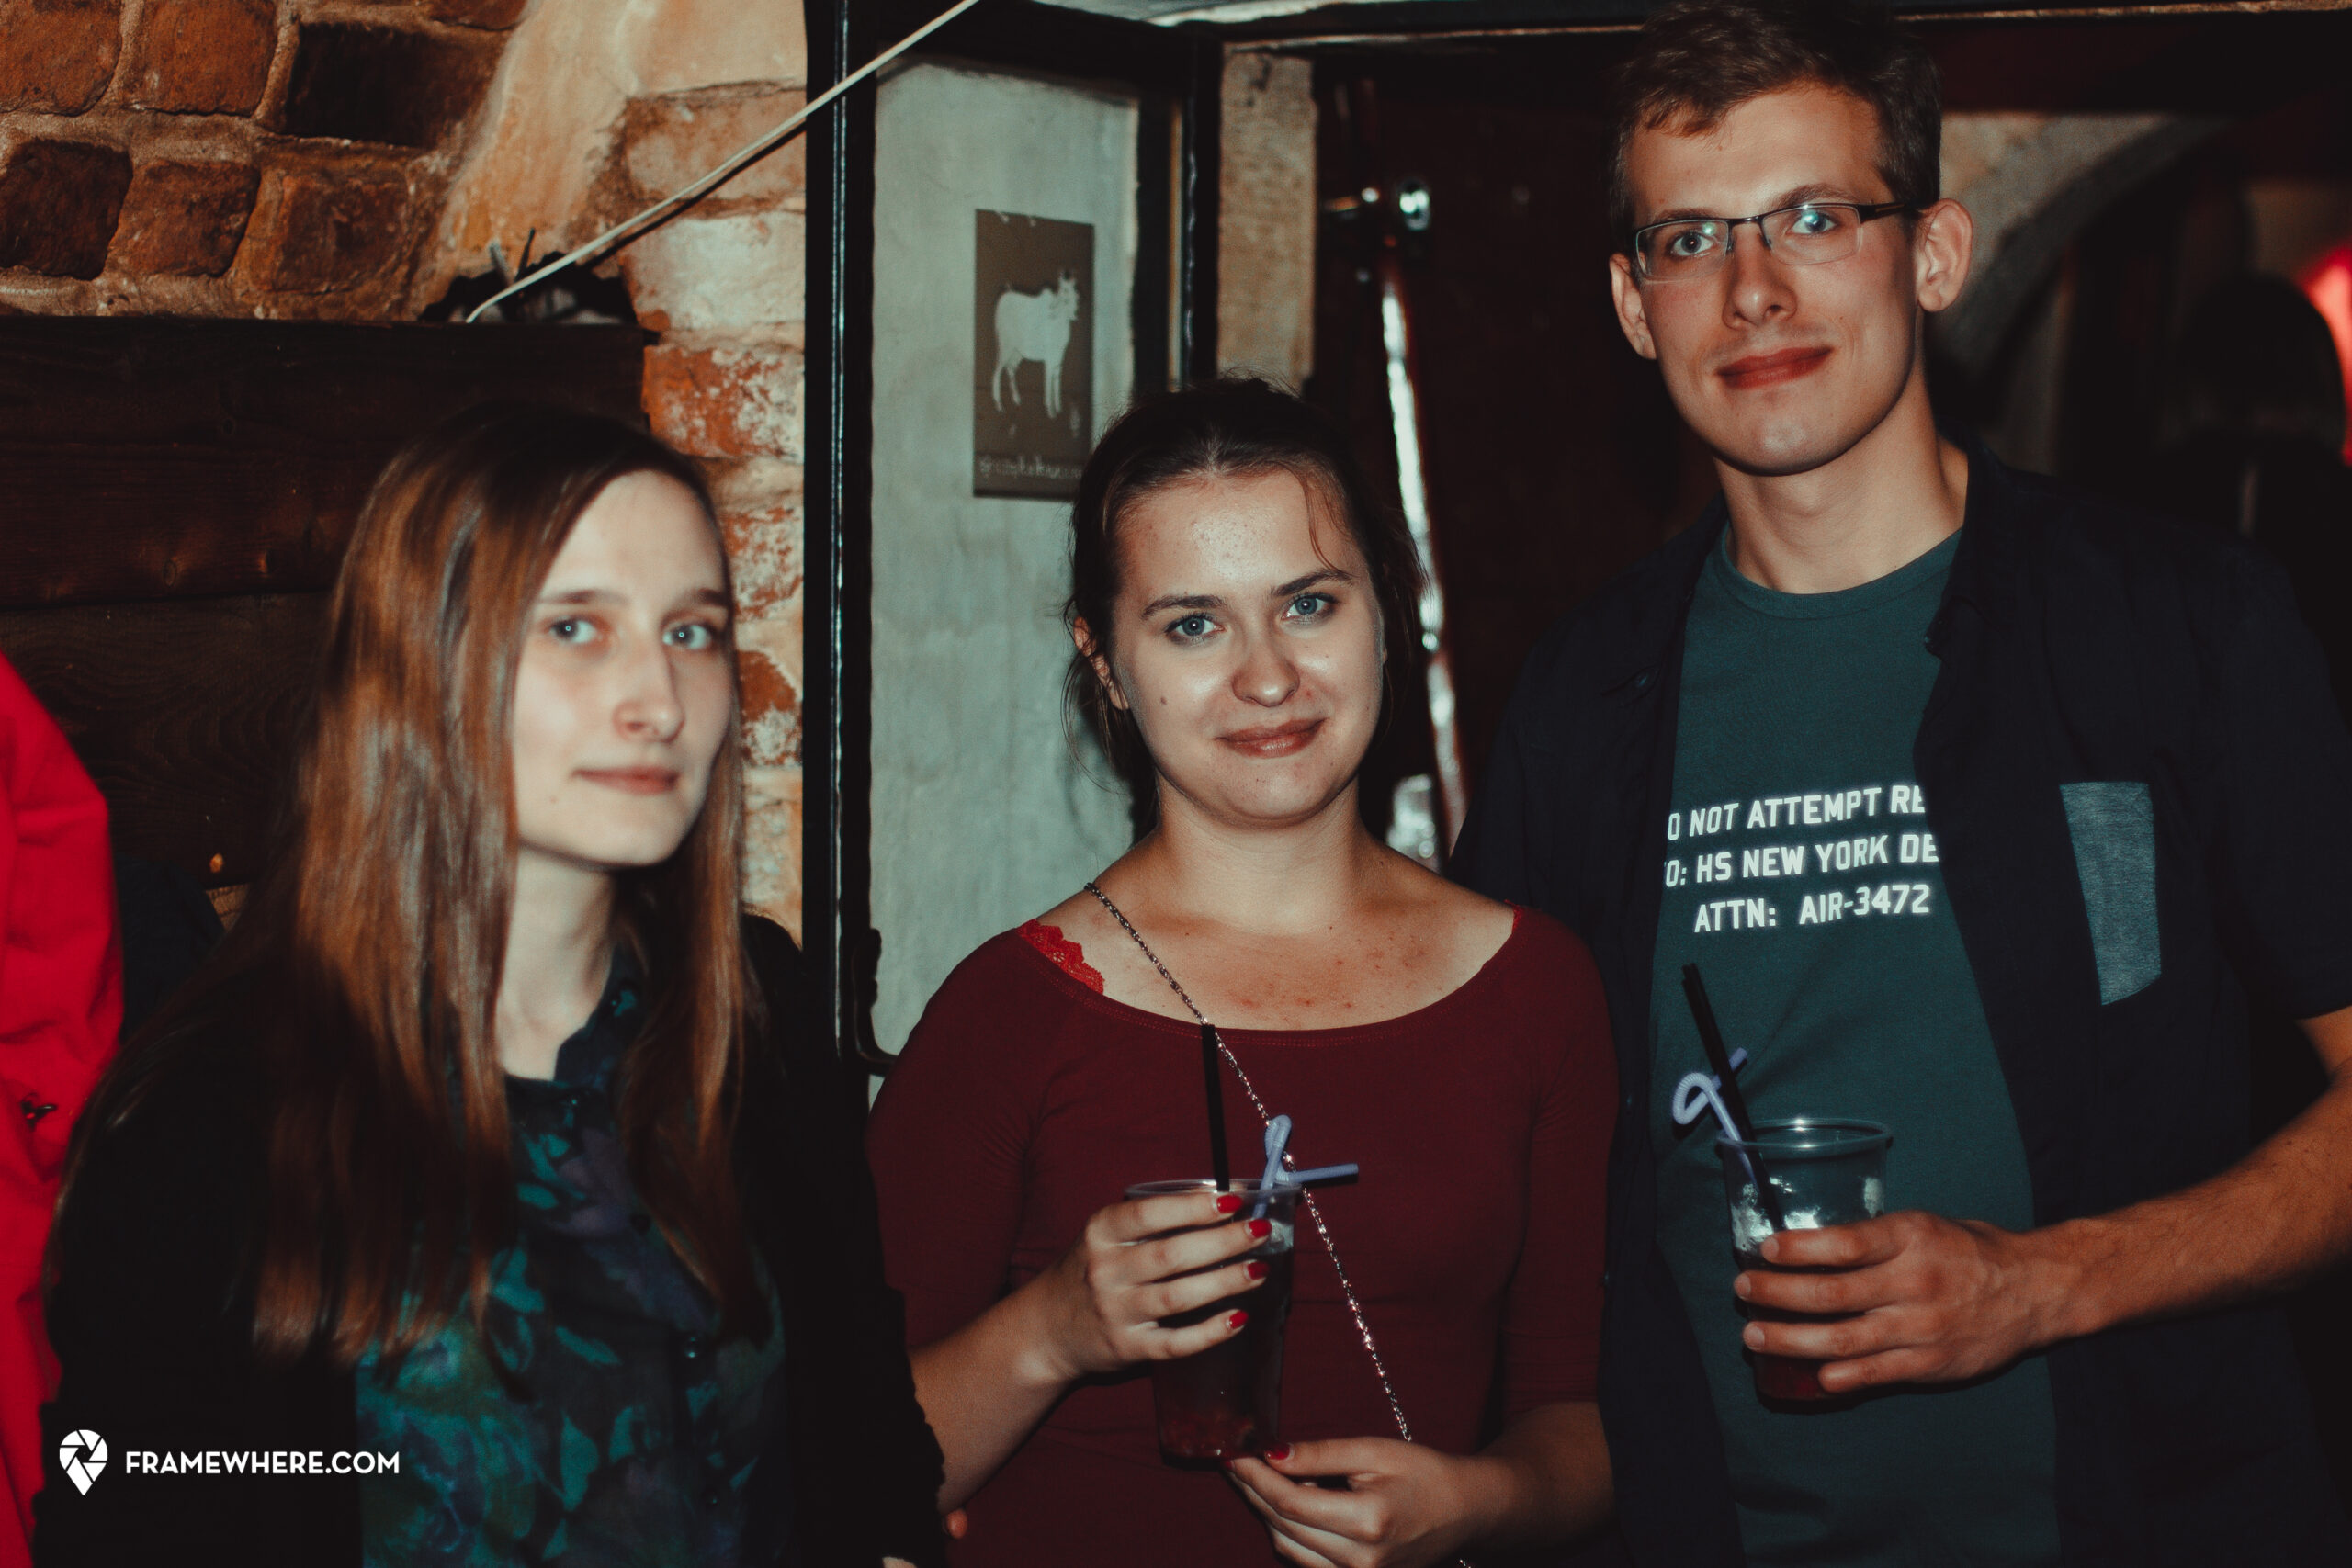 , Photos Or It Didn’t Happen: #OMGKRK Partners With Framewhere To Capture Krakow Startup Community